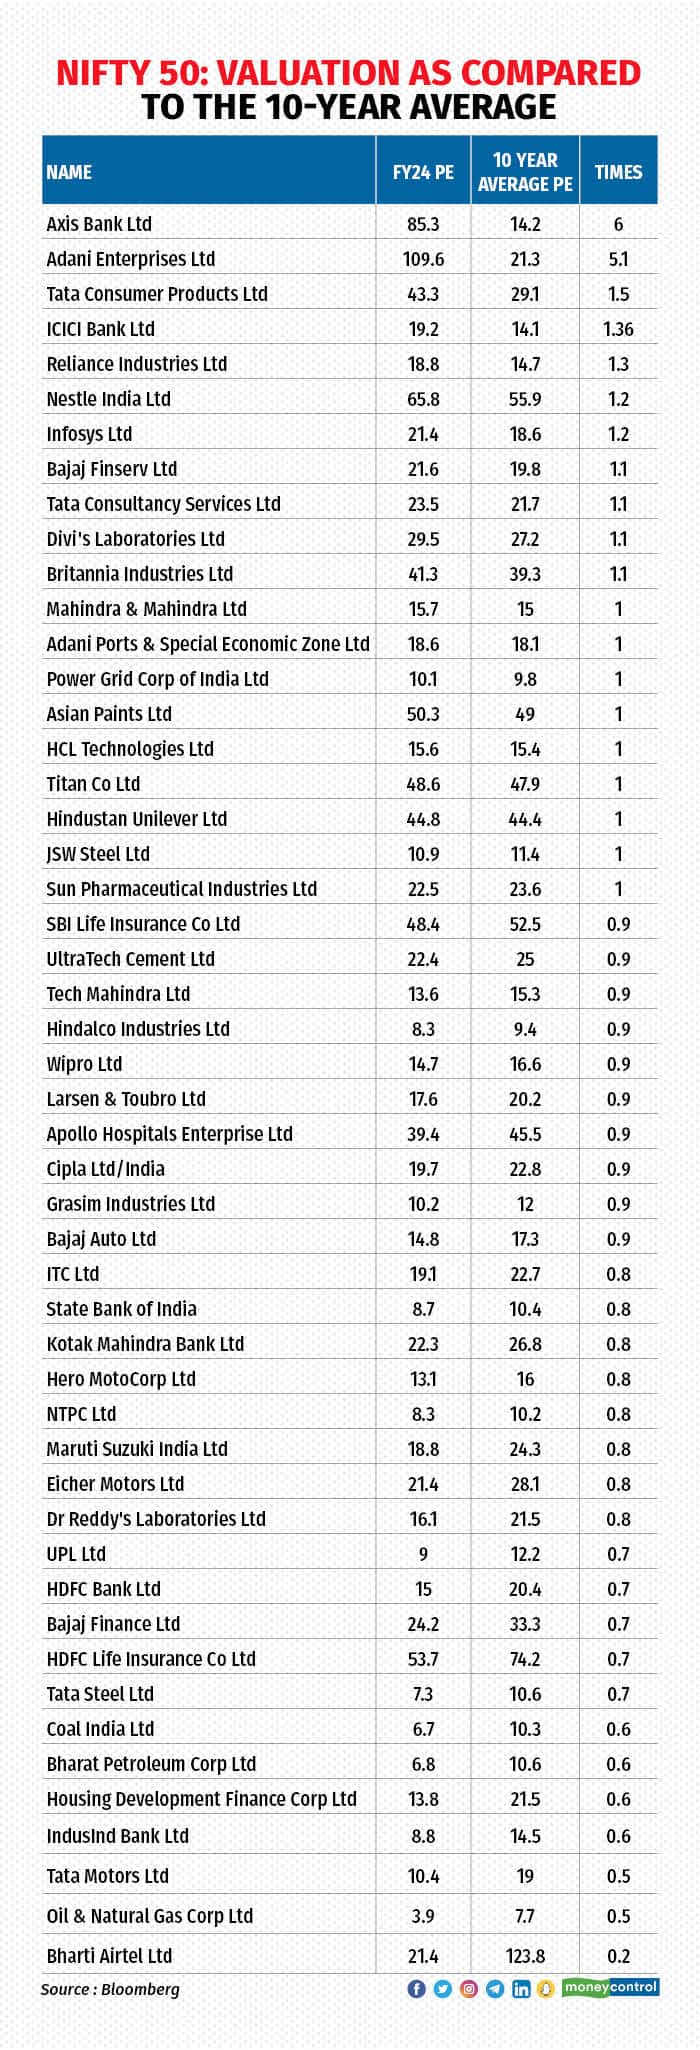 Nifty 50 Valuation data